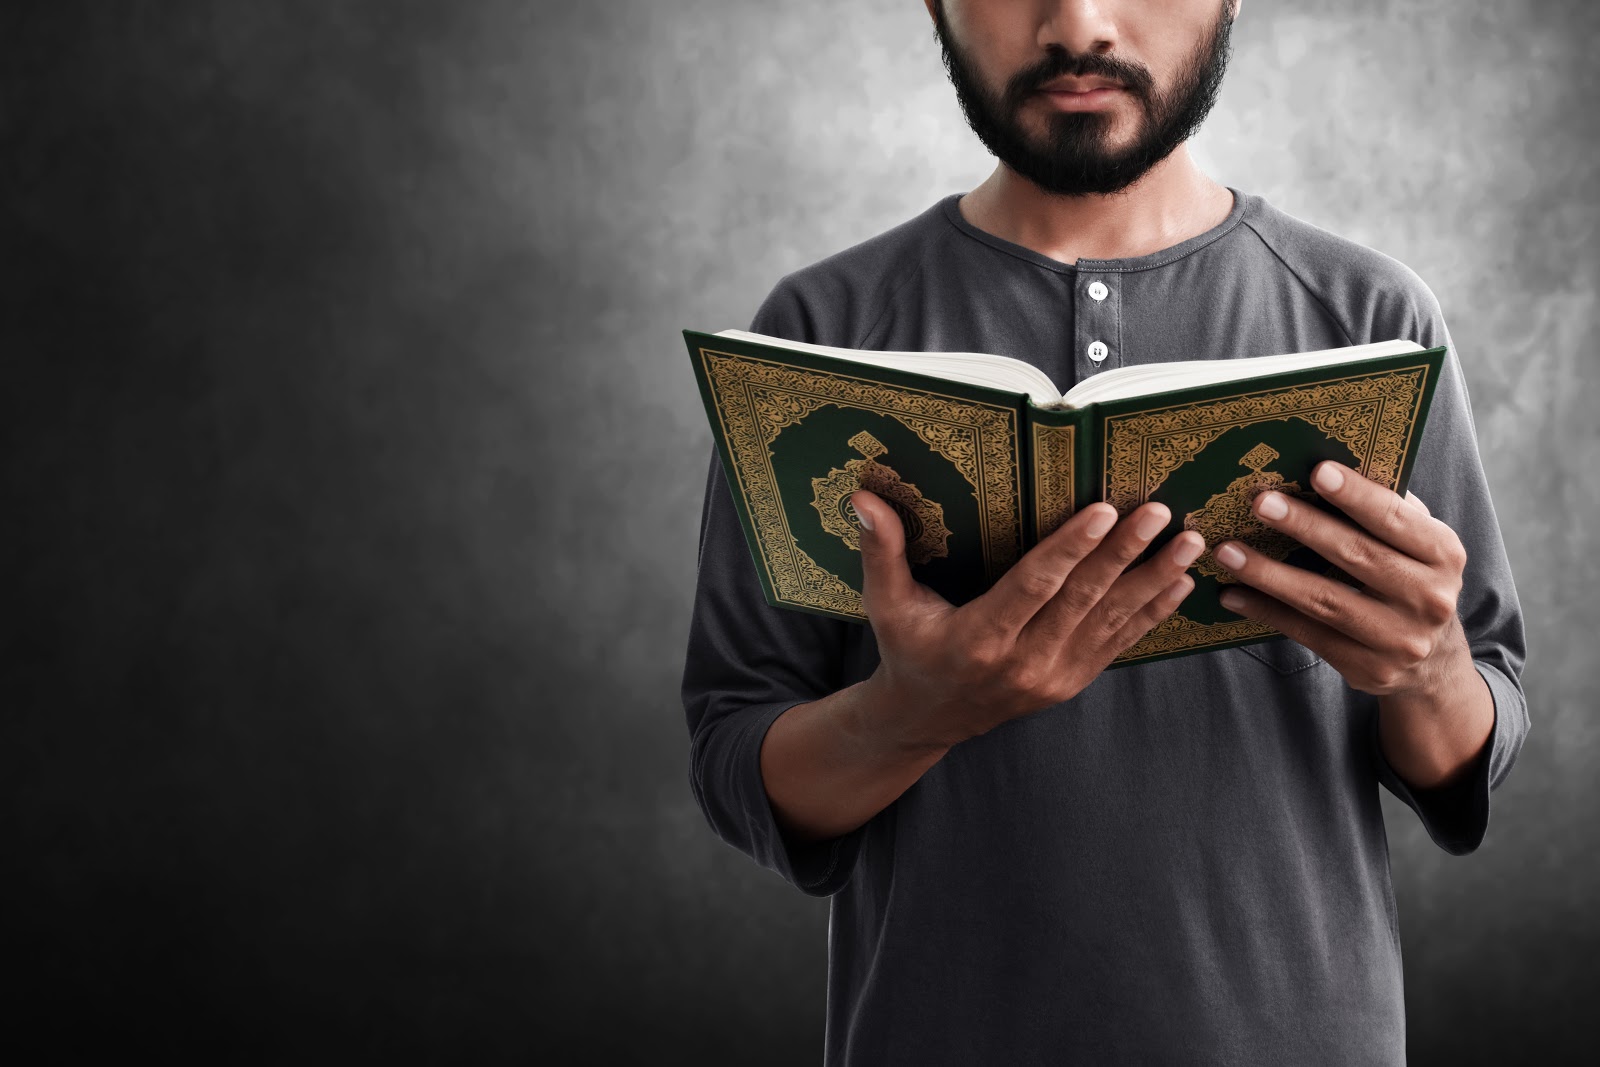 MuslimSG | 3 Lessons From Surah Yusuf to Cope With the New Normal